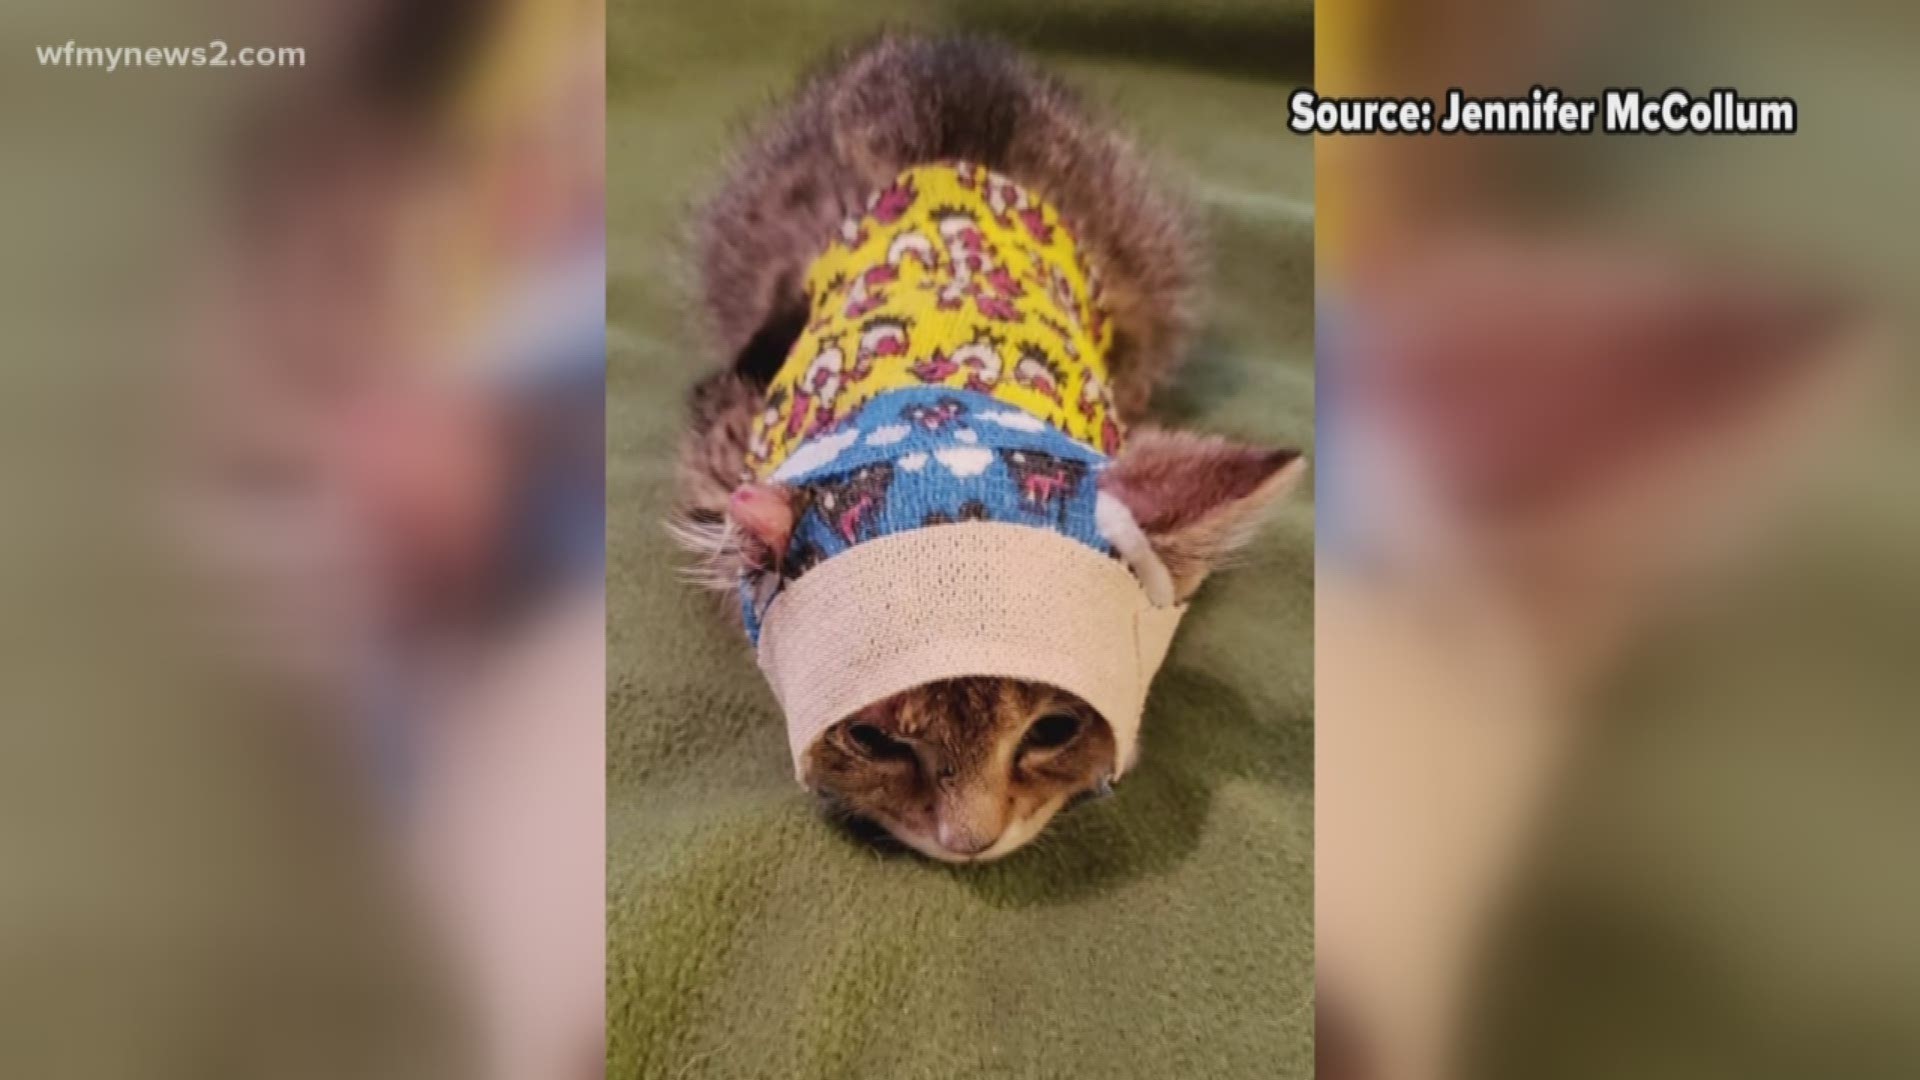 His foster parent thinks his previous owner may have used bleach to try and clean the cat.